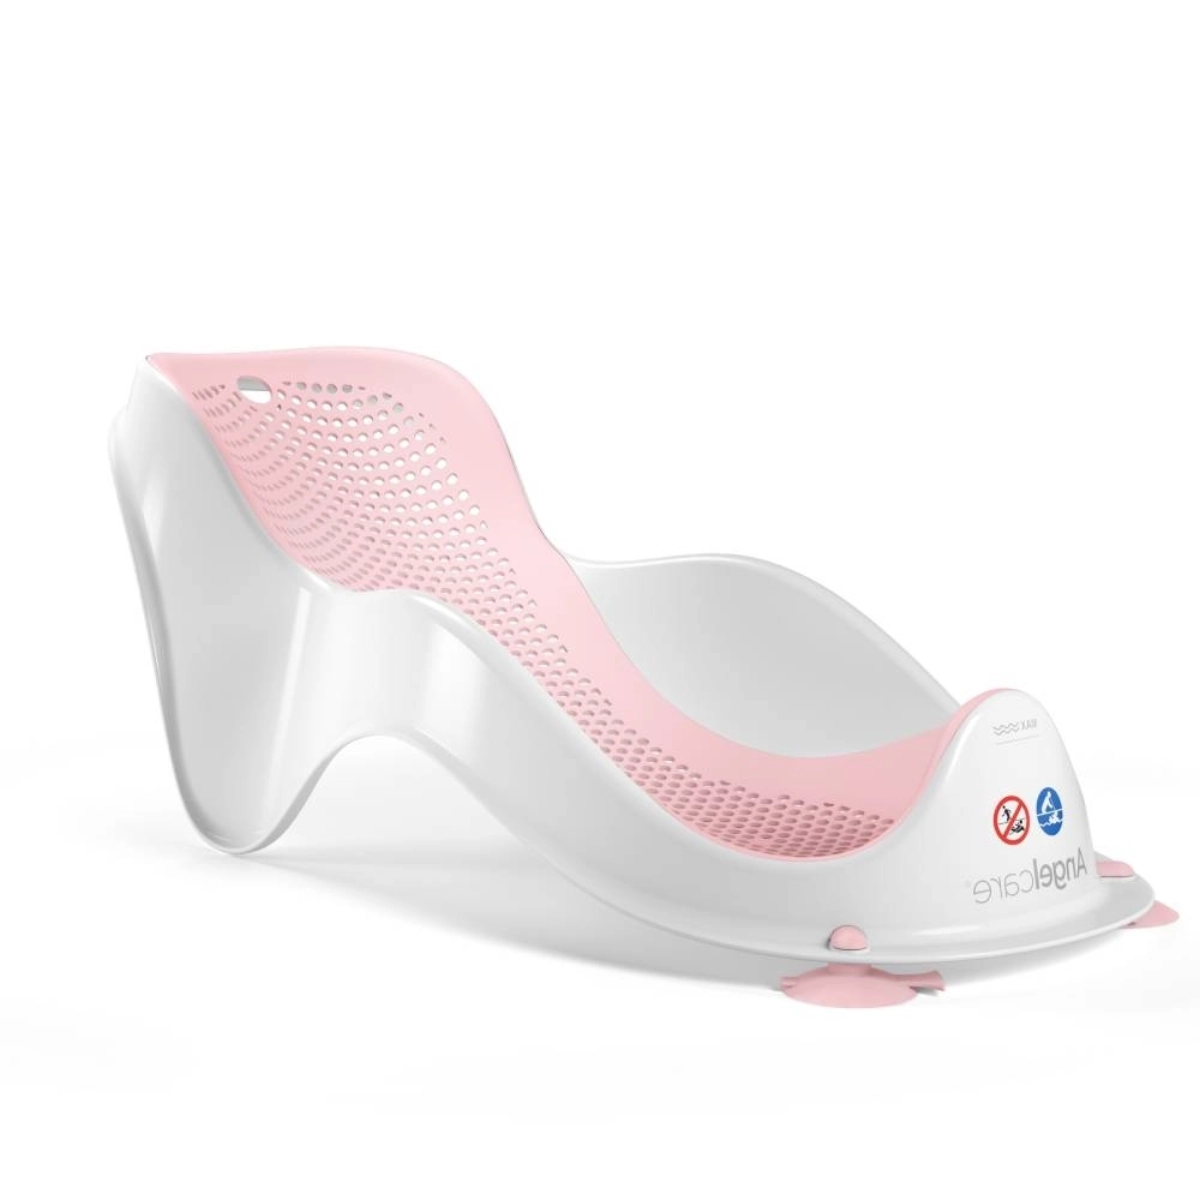 Image of Angelcare Soft Touch Mini Baby Bath Support-Pastel Pink (2021)